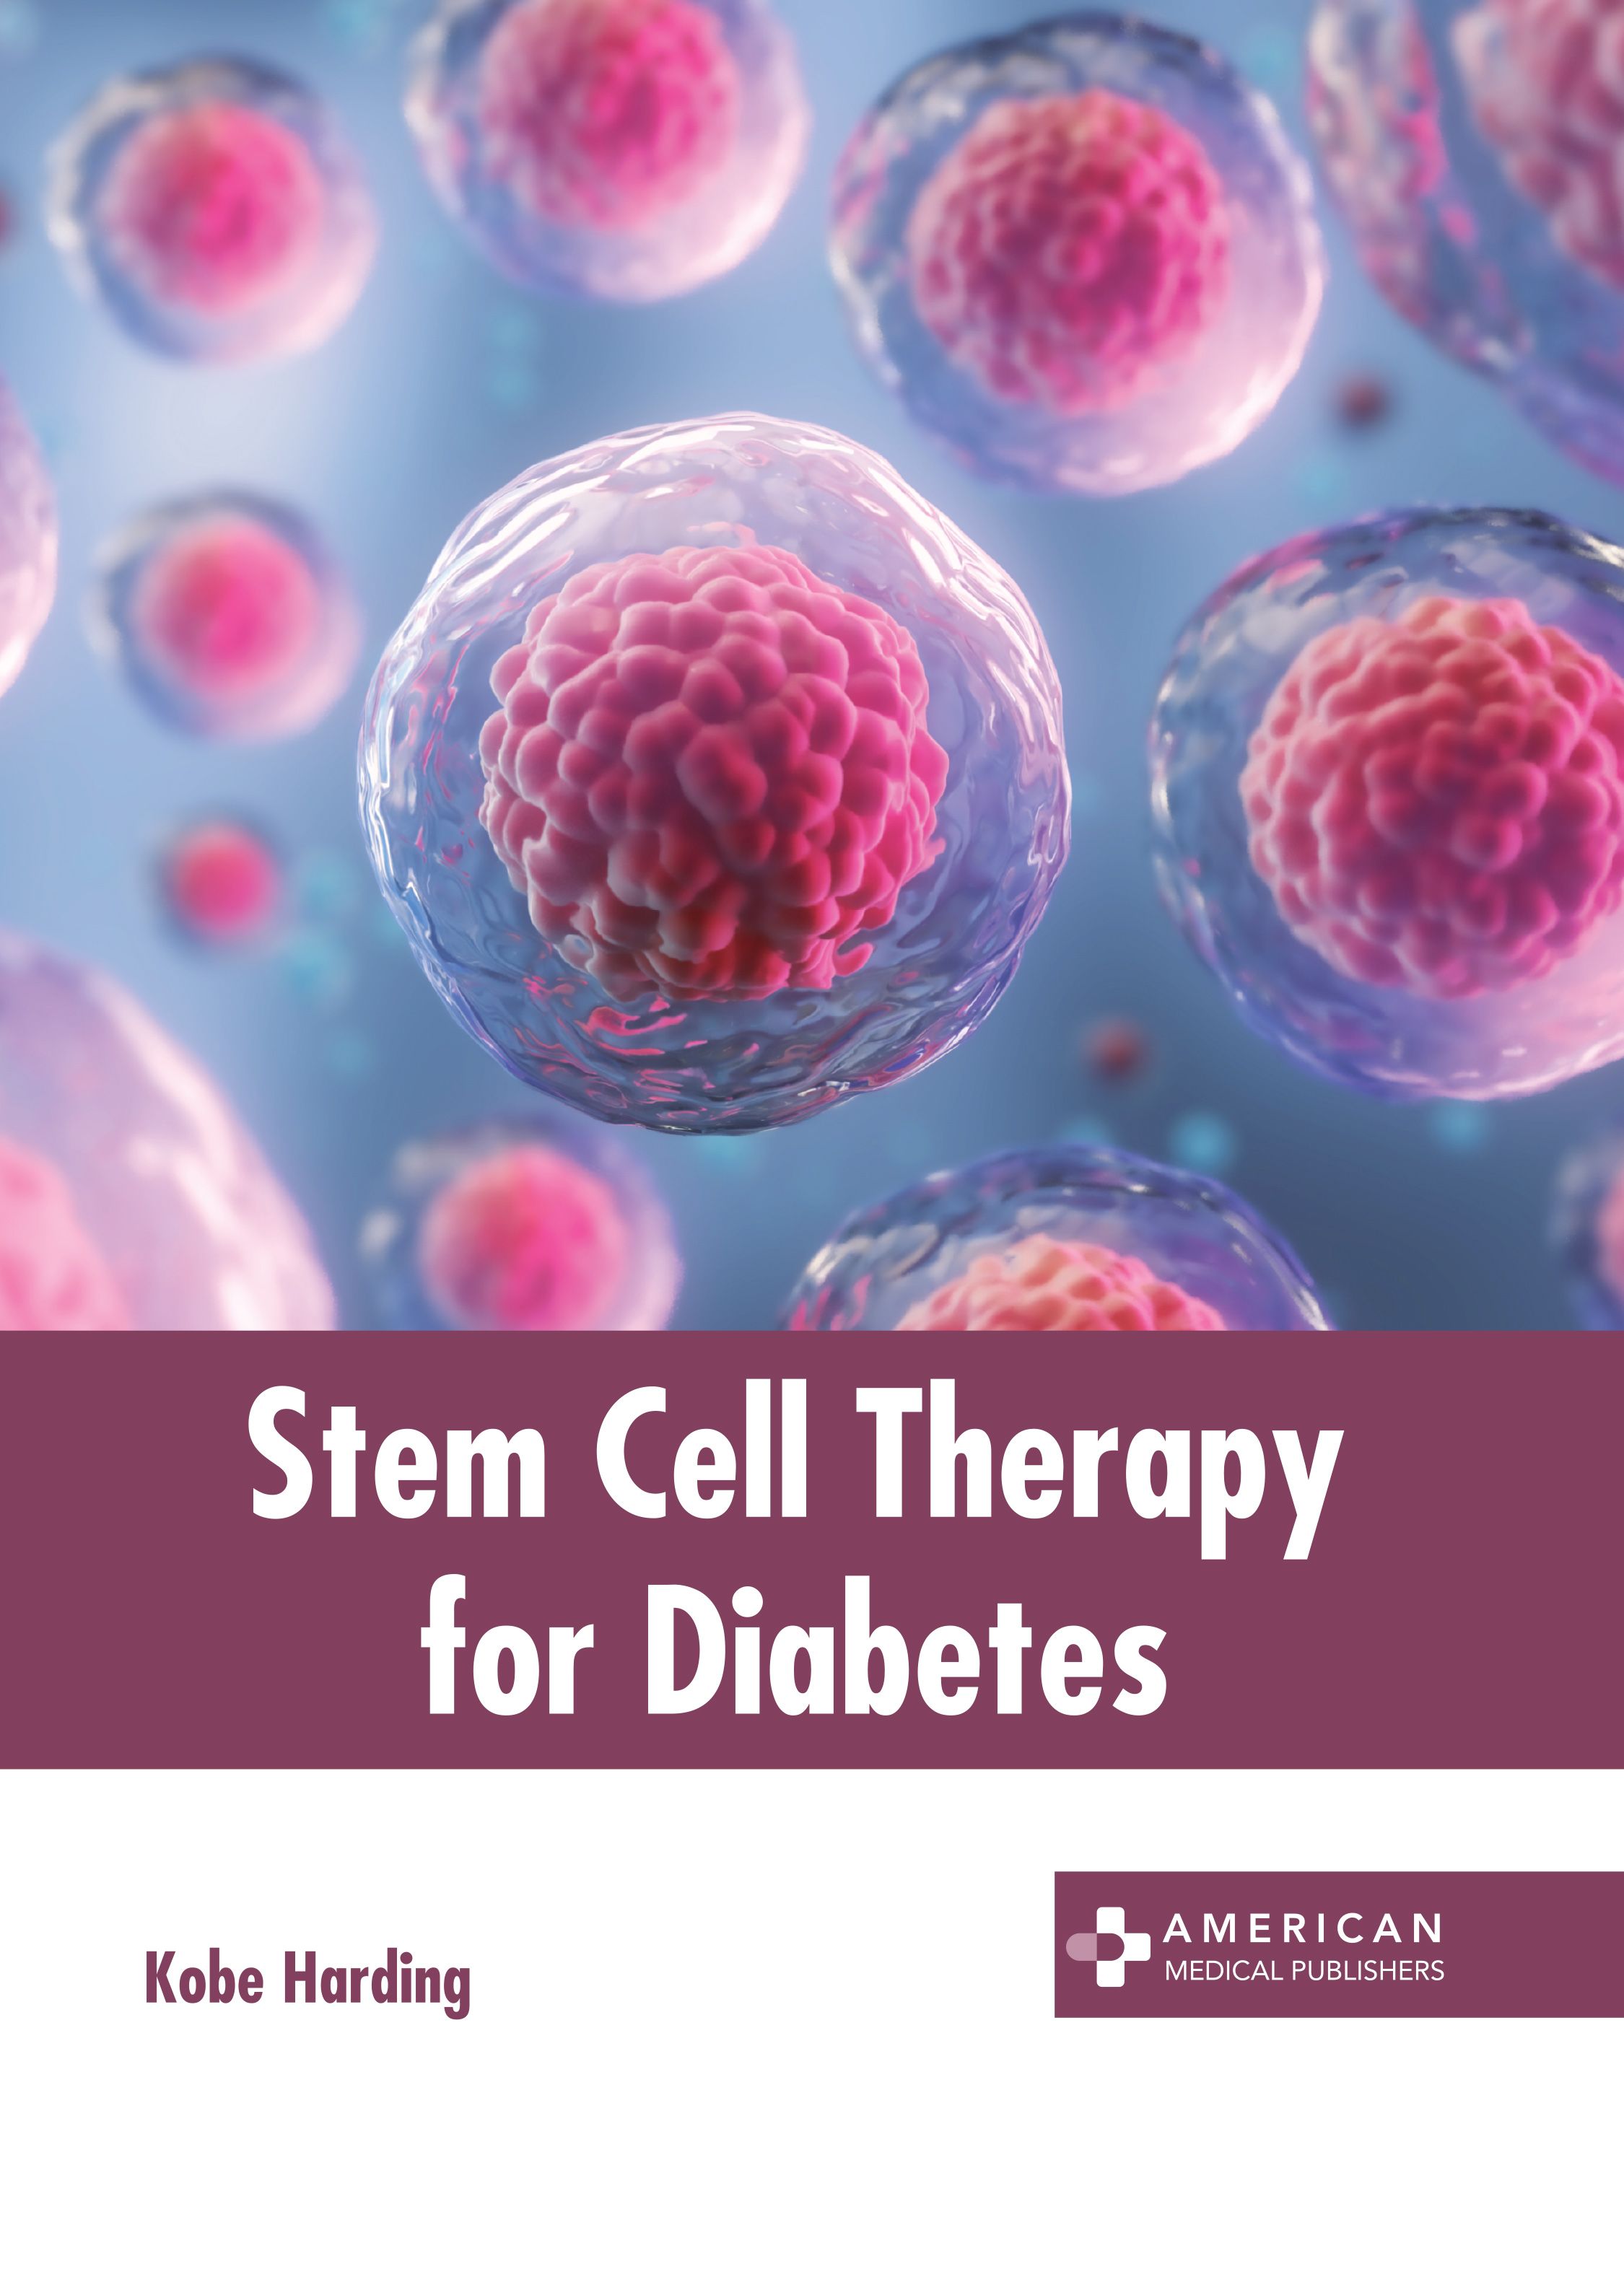 STEM CELL THERAPY FOR DIABETES